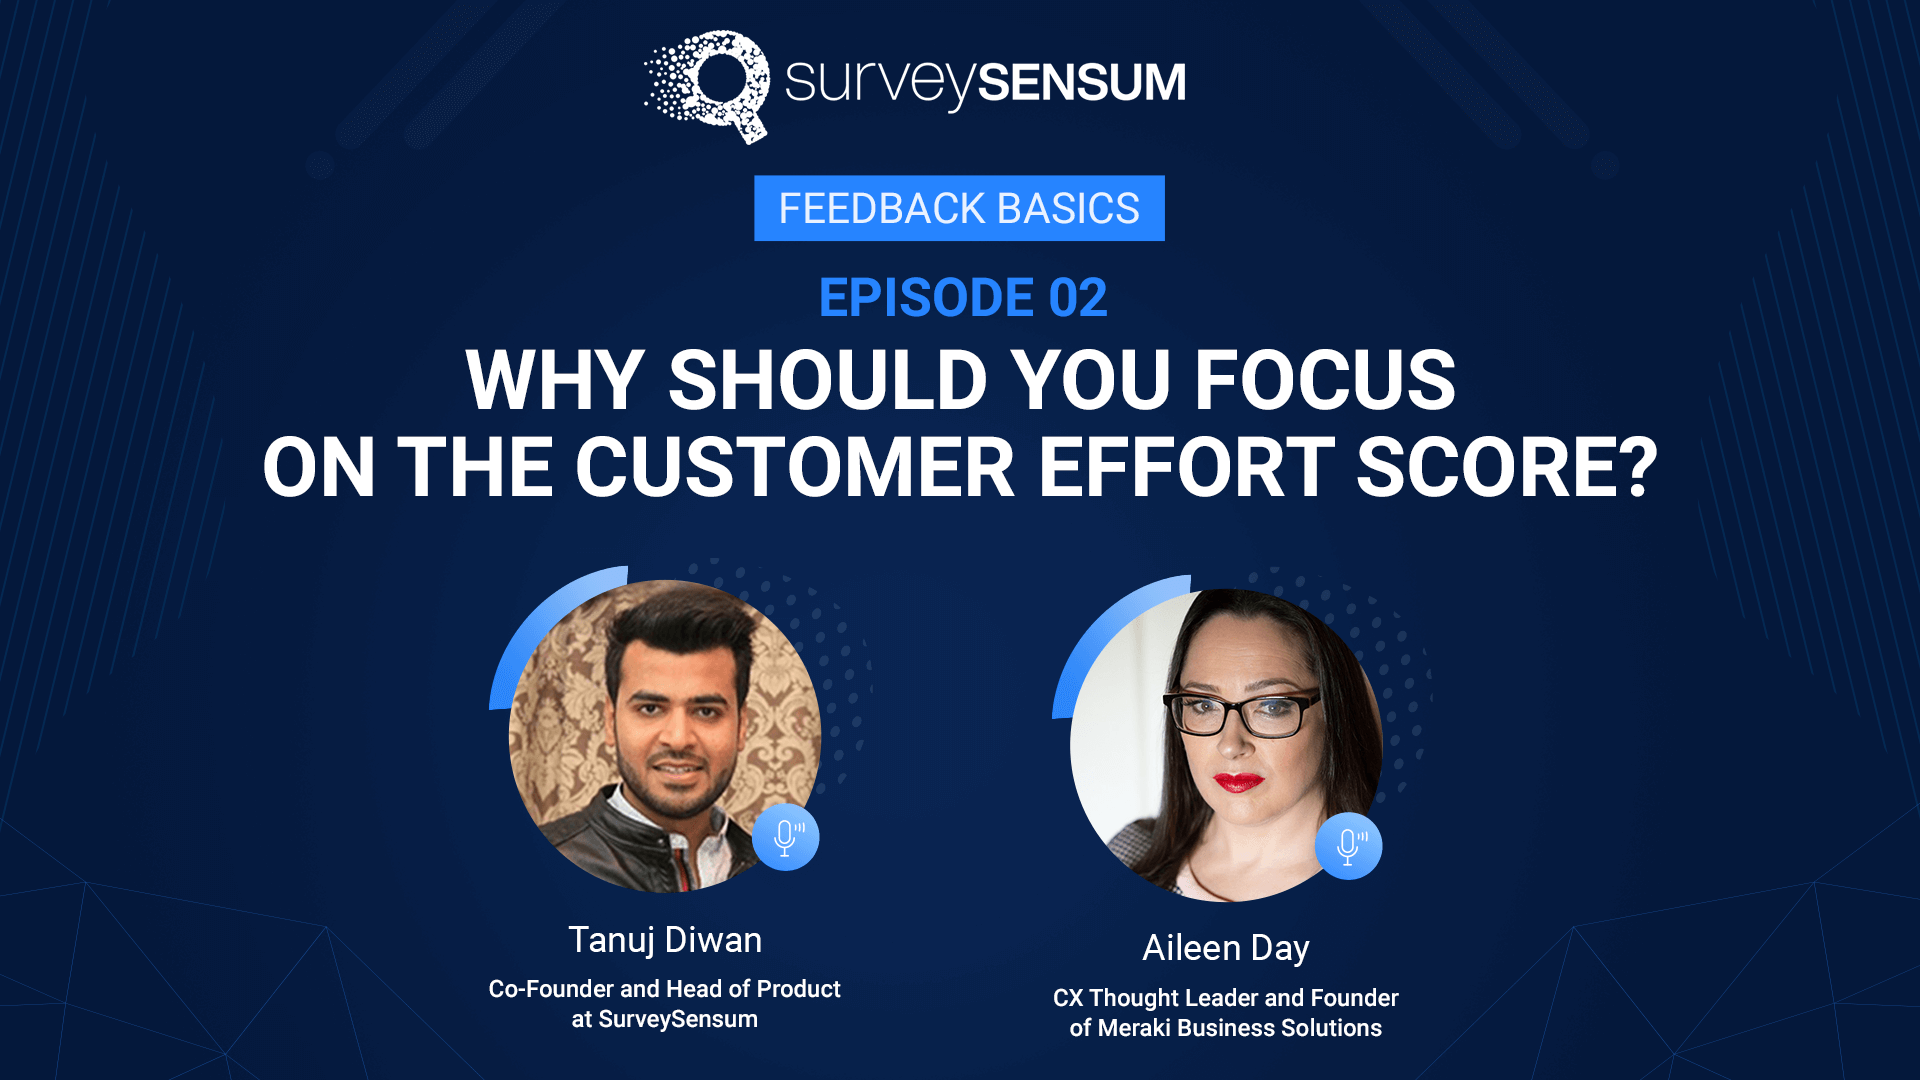 Why should you focus on the Customer Effort Score?